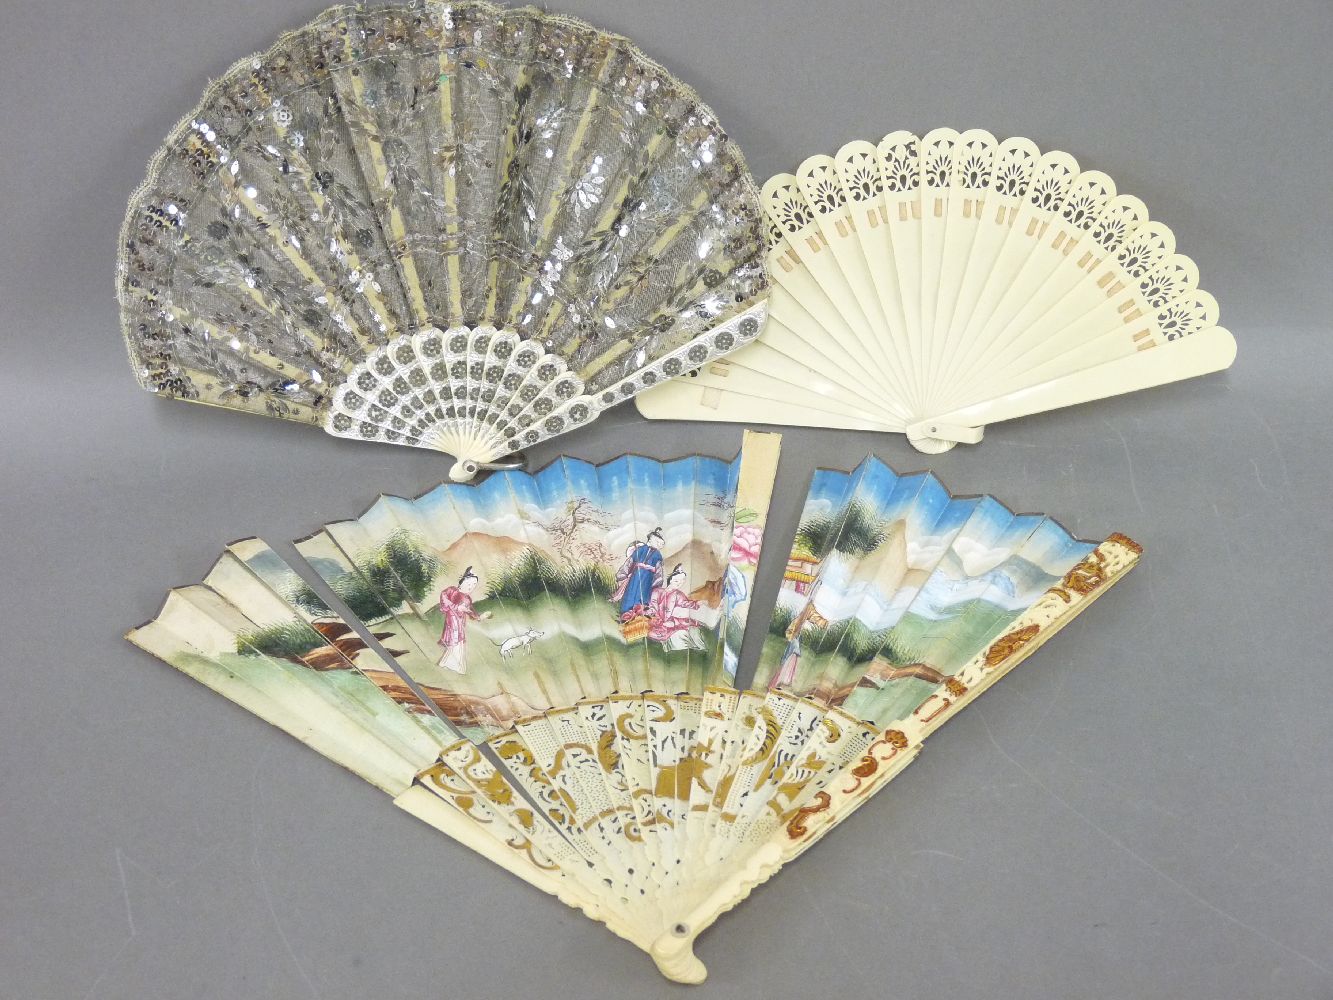 A Spanish fan, in bone and lace, 20cm, and two further fans, two boxed